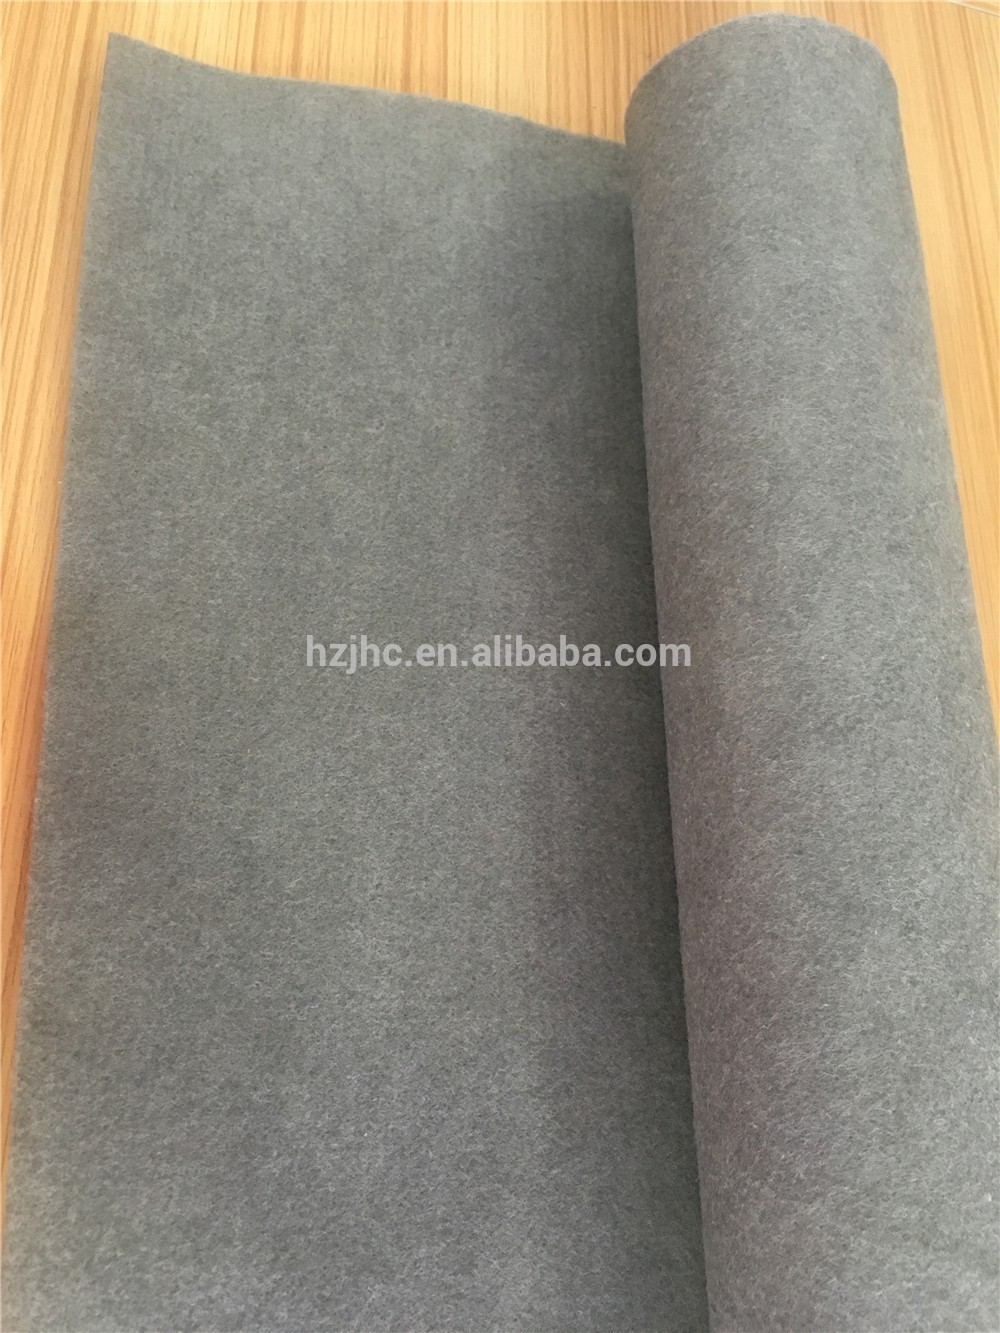 Nonwoven Technics And 180gsm-550gsm Weight Car Cover